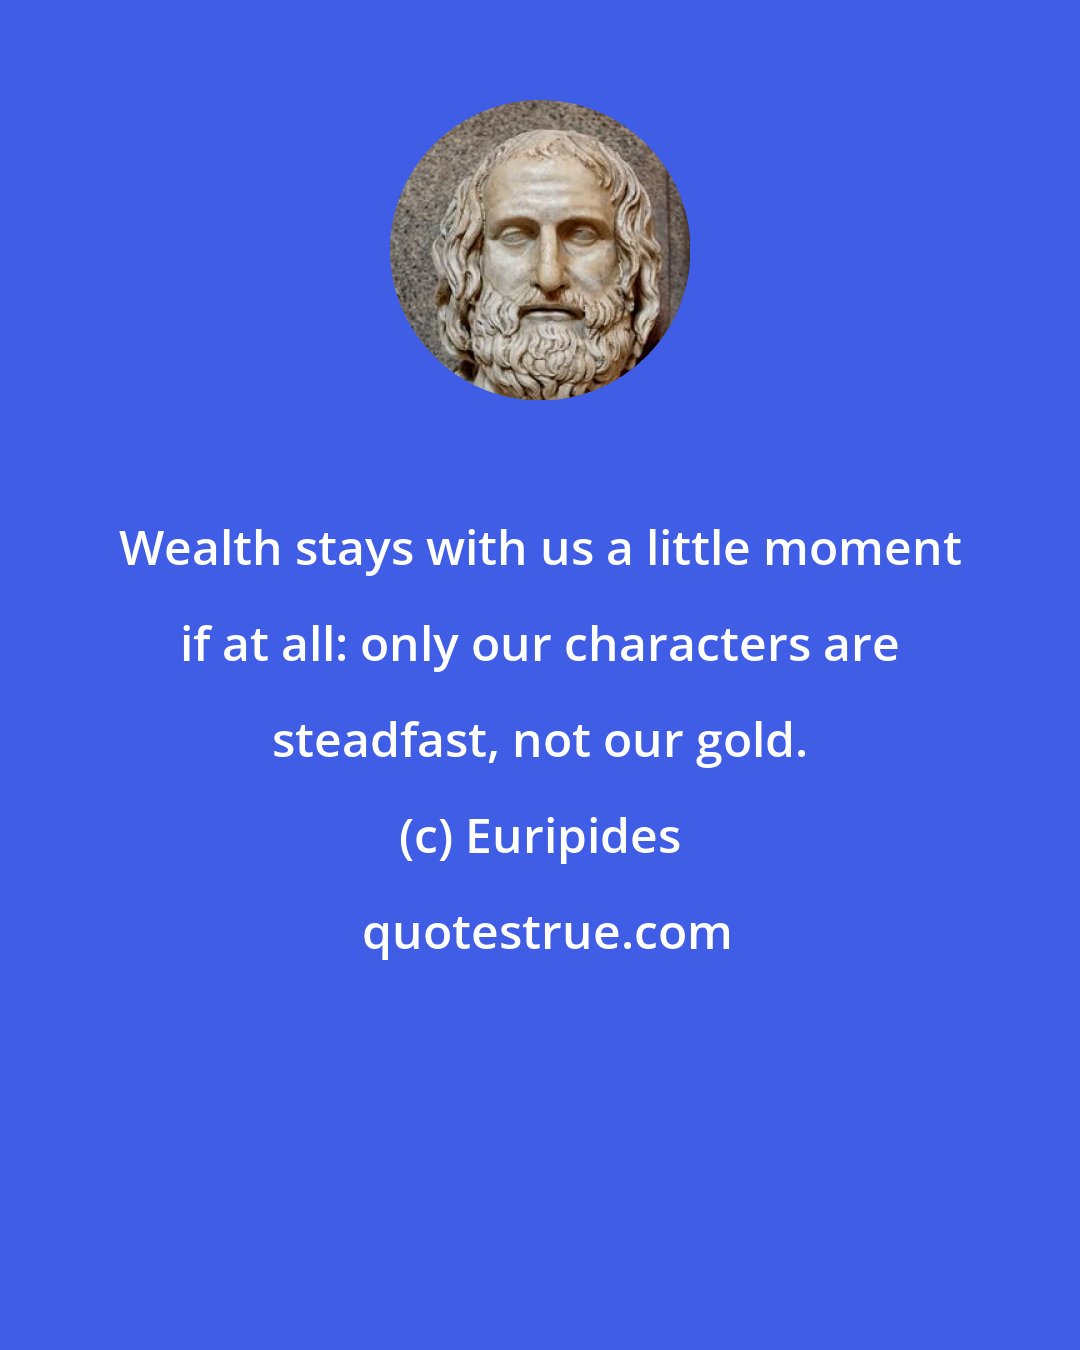 Euripides: Wealth stays with us a little moment if at all: only our characters are steadfast, not our gold.